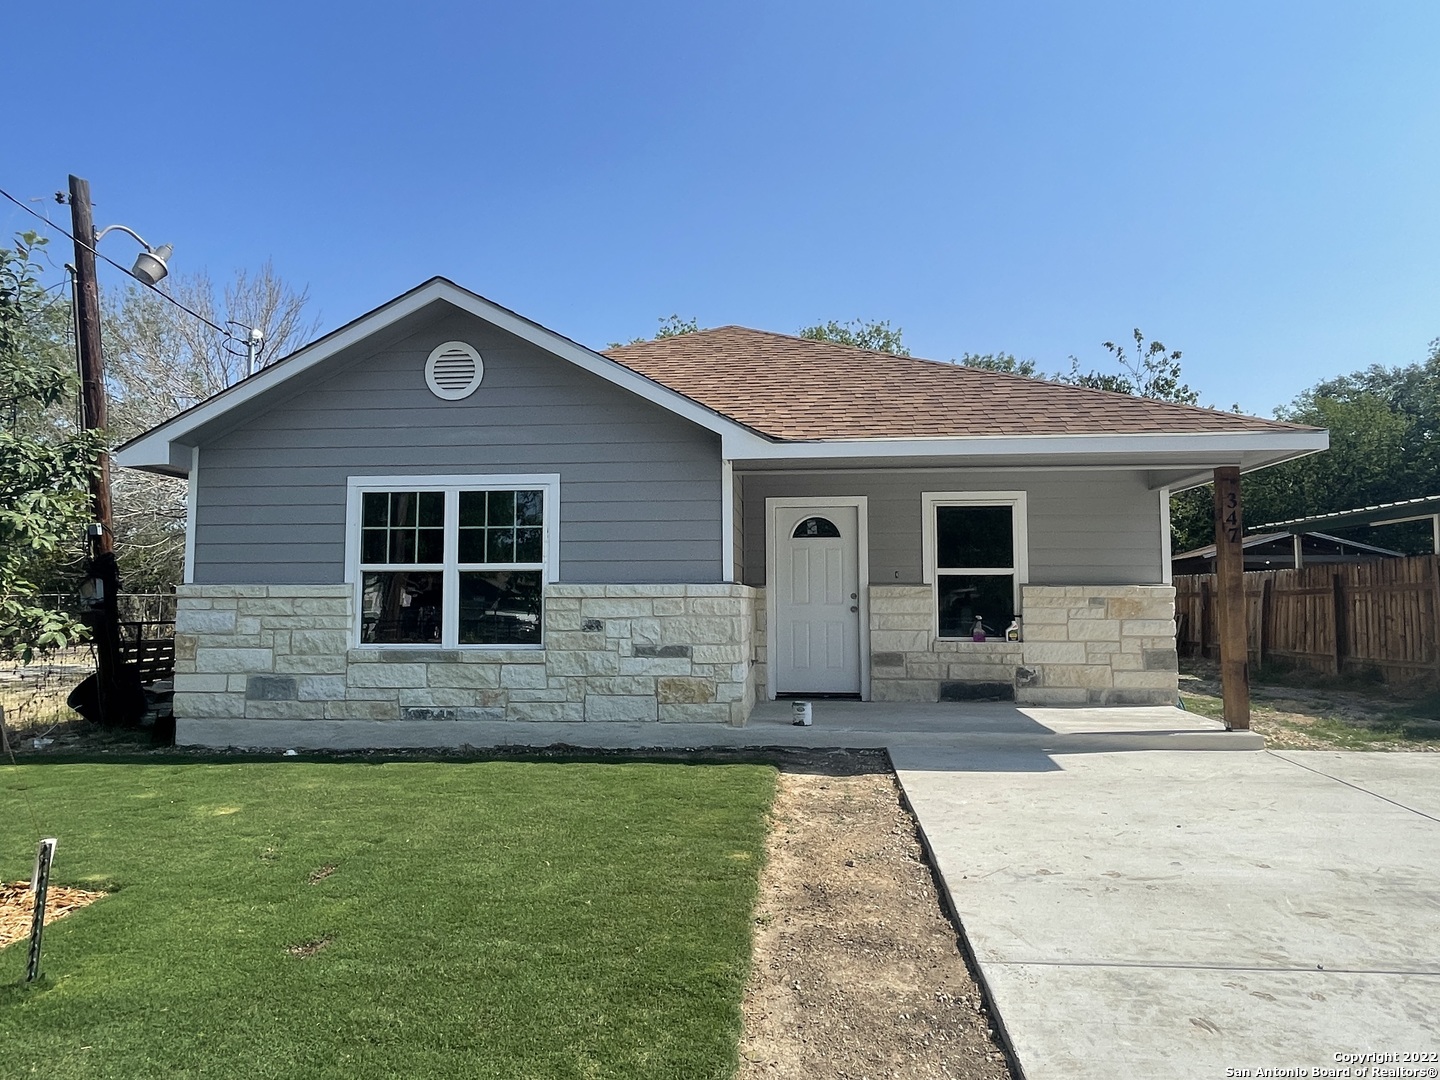 Beautiful New Construction home sitting on a large lot in Southside San Antonio near Palo Alto. This 3 Bedroom spacious charmer is close to shopping, malls, and highways. High ceilings, granite, and tile throughout give this home a luxurious look and feel. Make this gorgeous home yours.